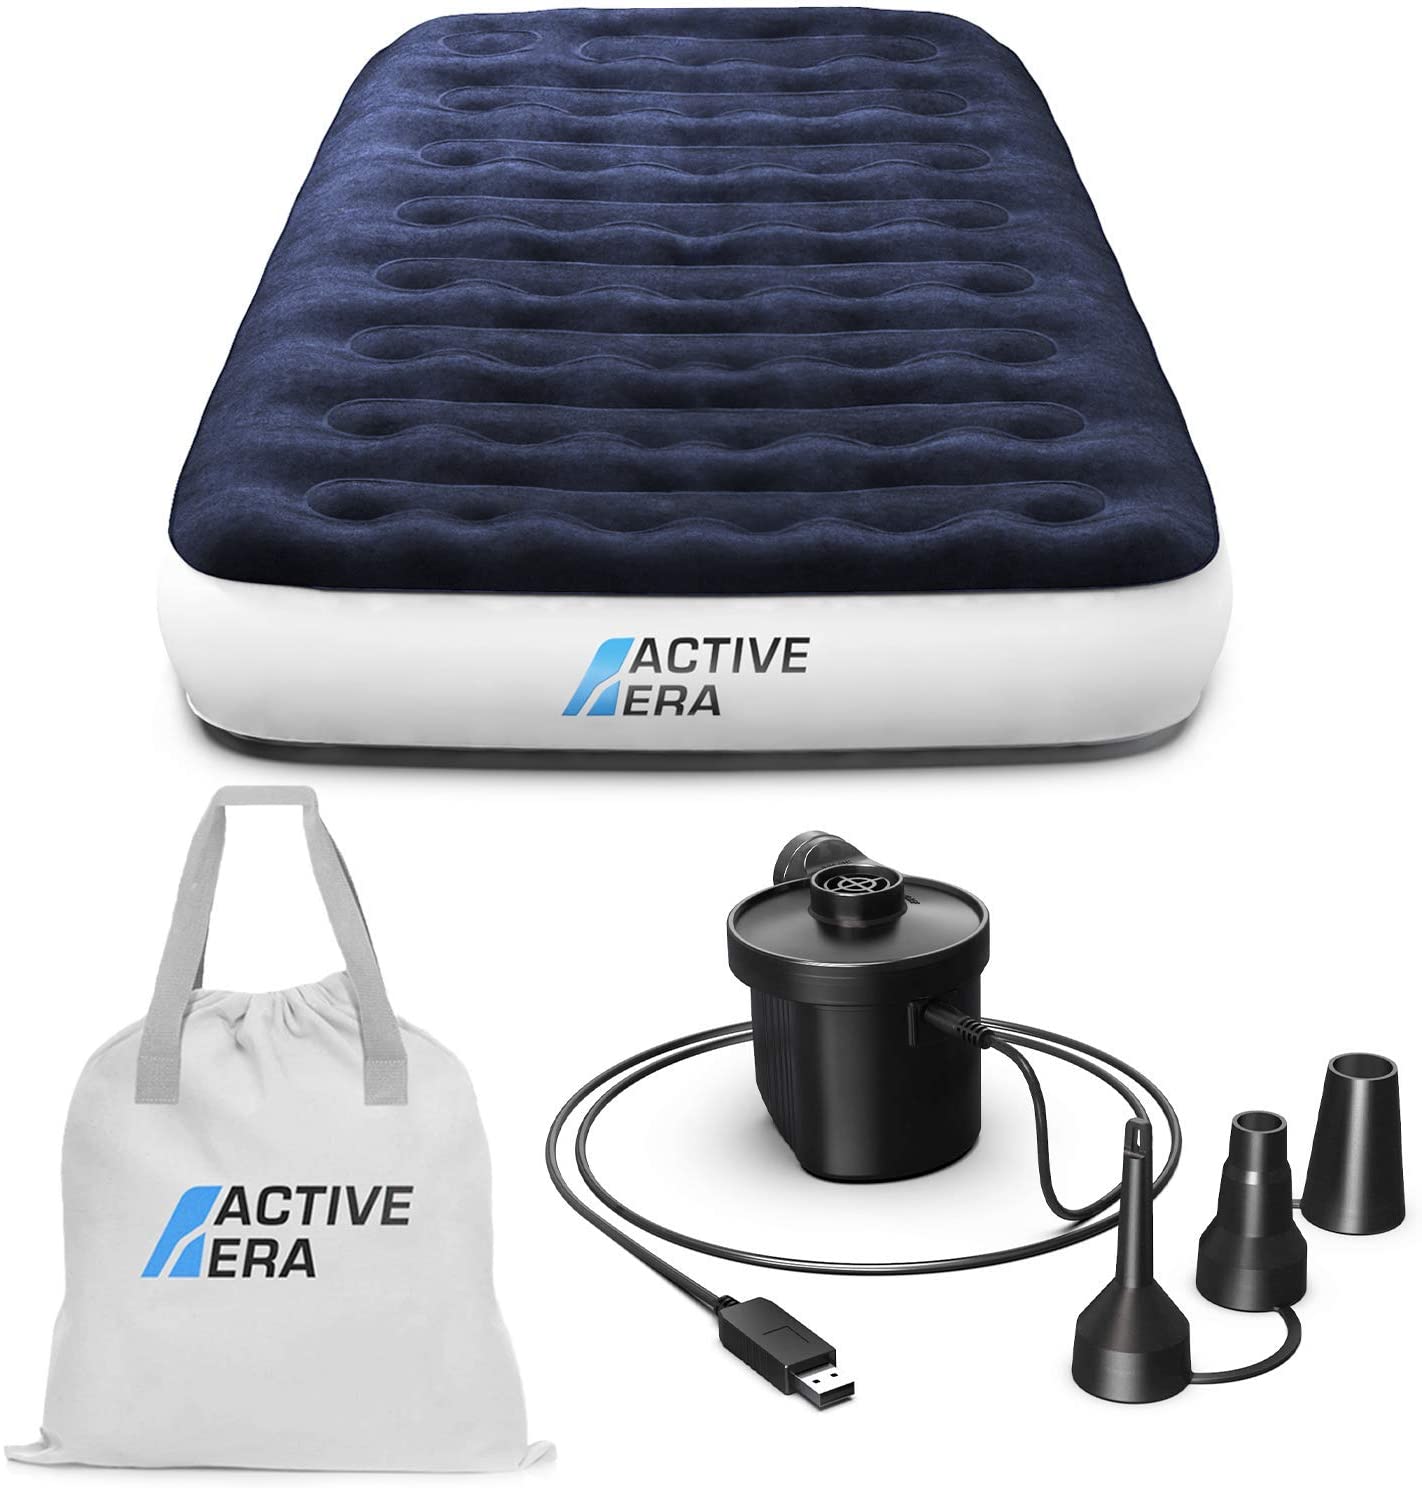 An air bed with a built in pump